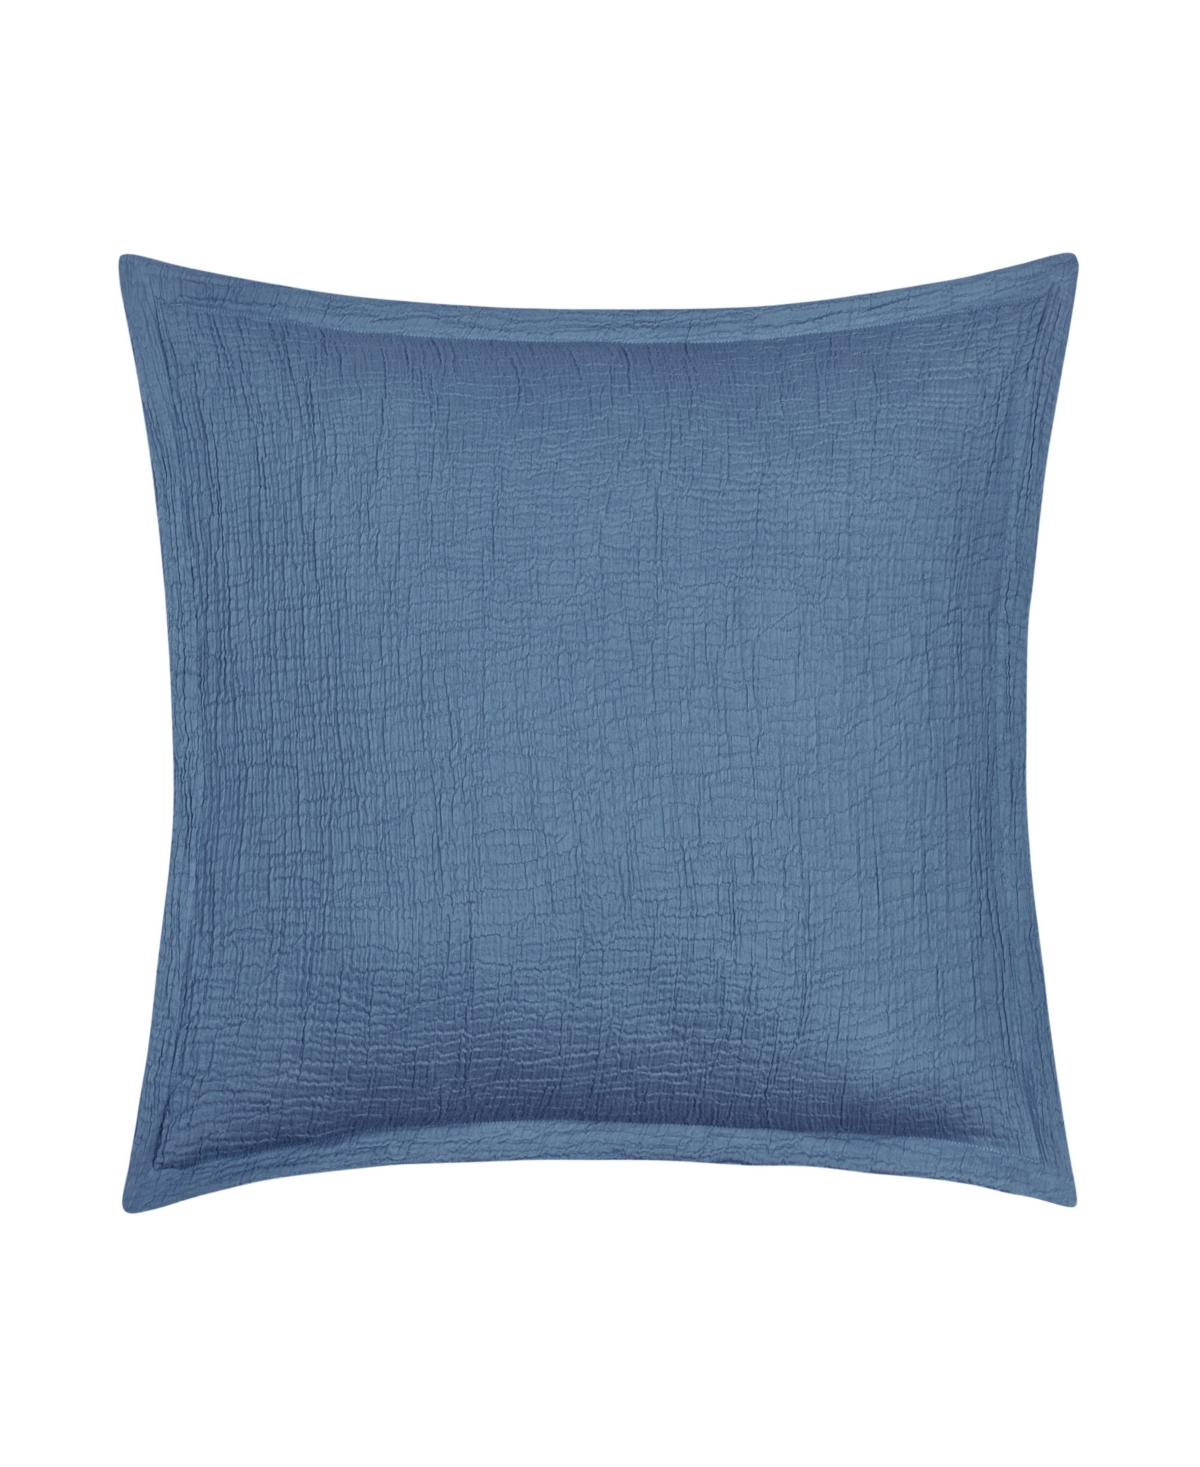 White Sand South Seas Square Decorative Pillow Cover, 20" X 20" In Dusk Blue